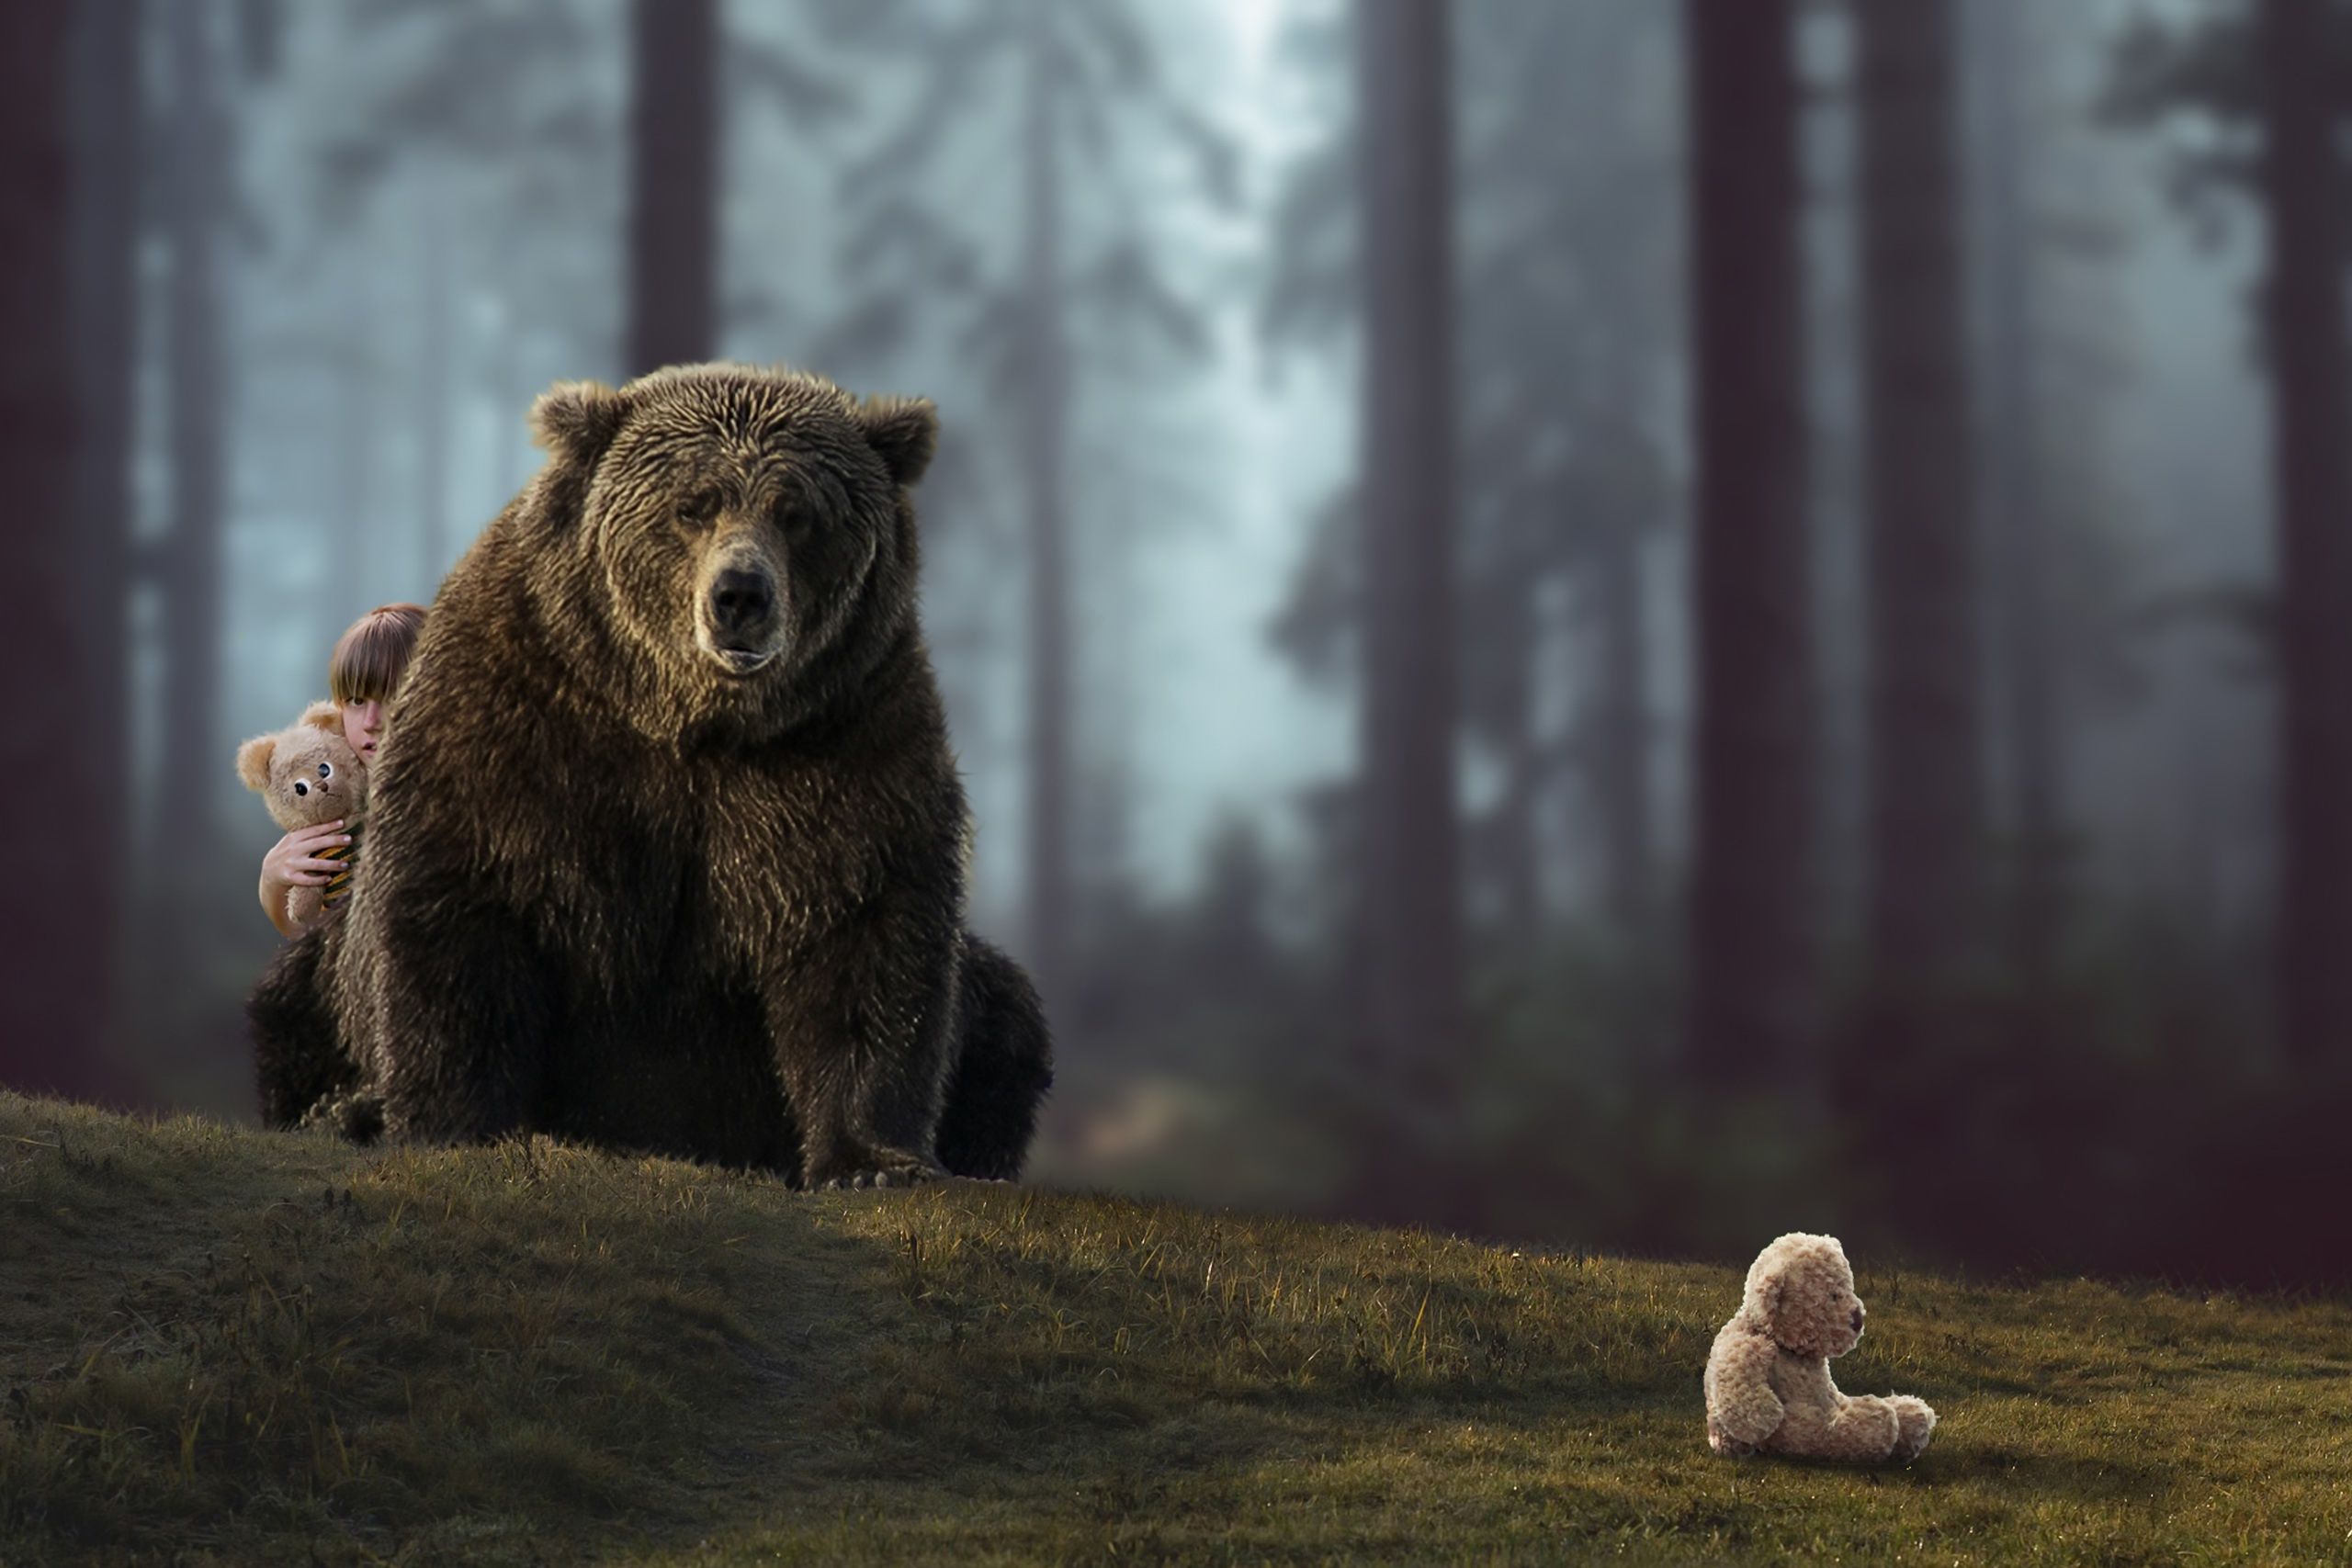 Wallpaper download forest, the situation, bear, bears, girl